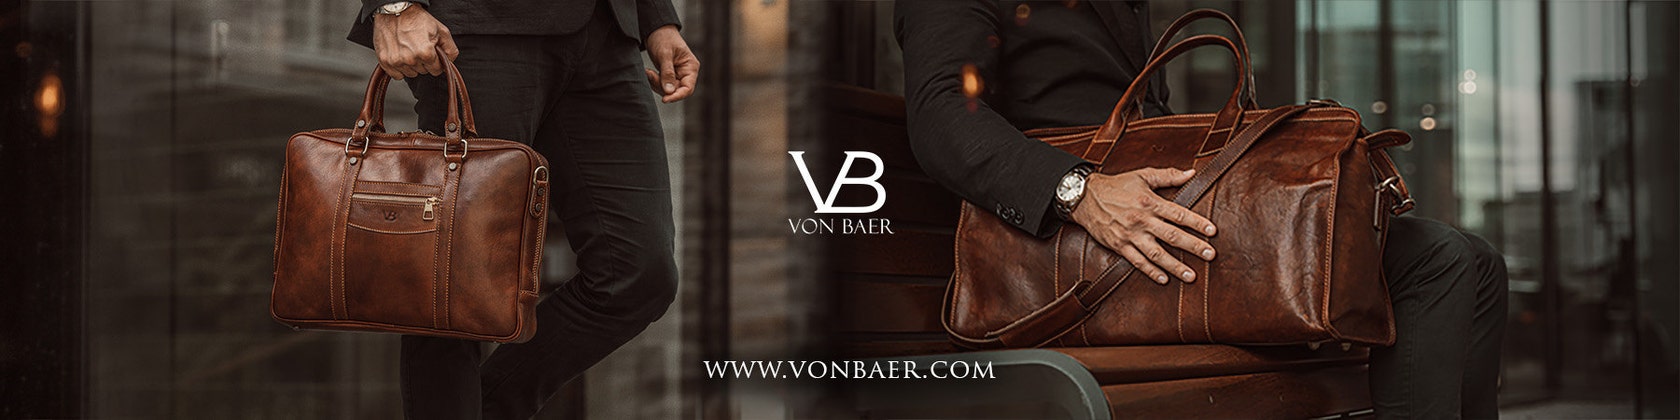 Women's leather work bags  Business bags & Office bags - Von Baer